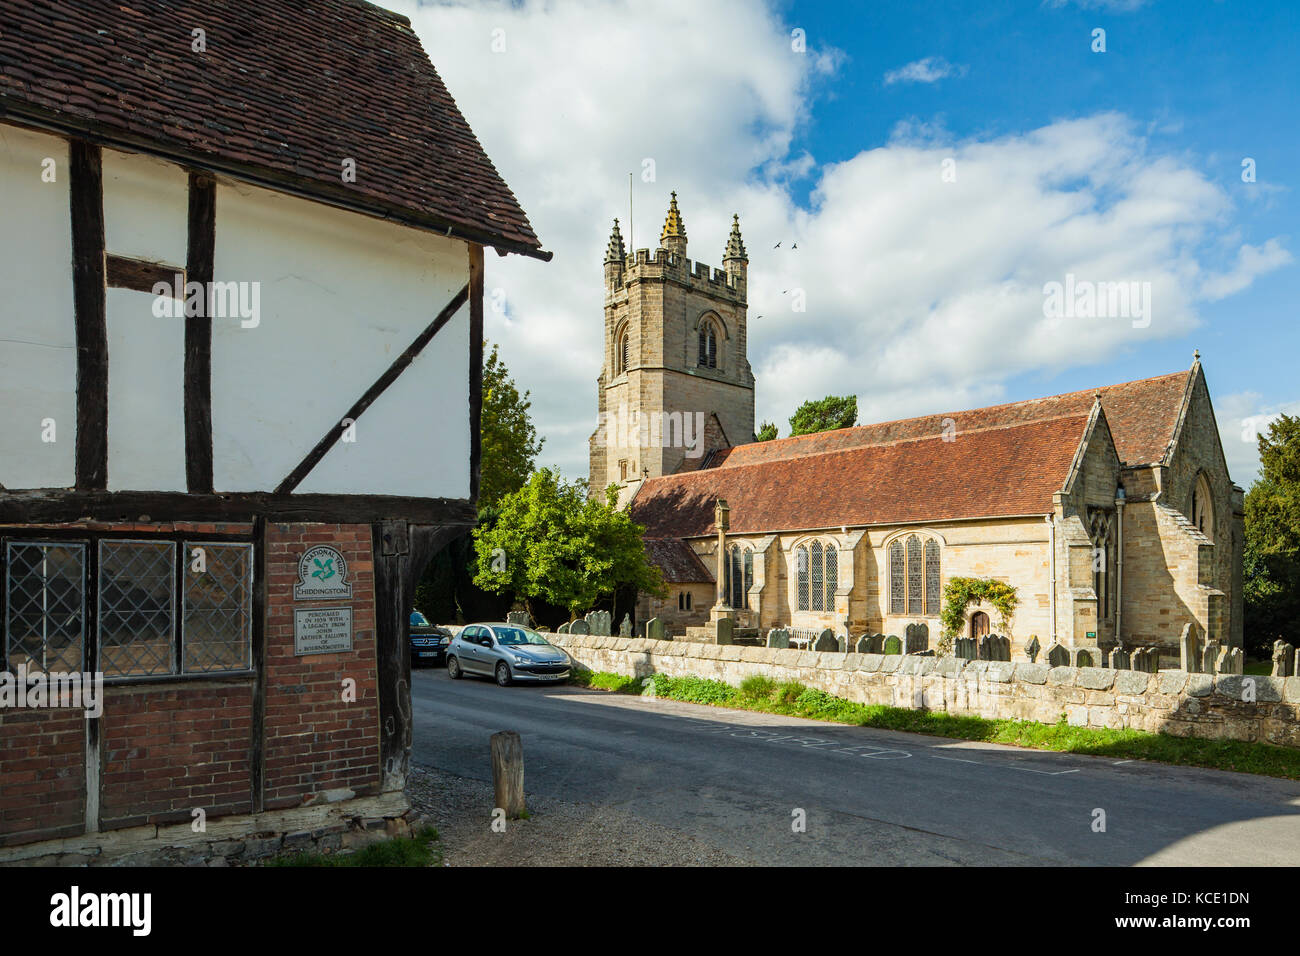 St Mary's church in Chiddingstone village, Kent, England. Stock Photo